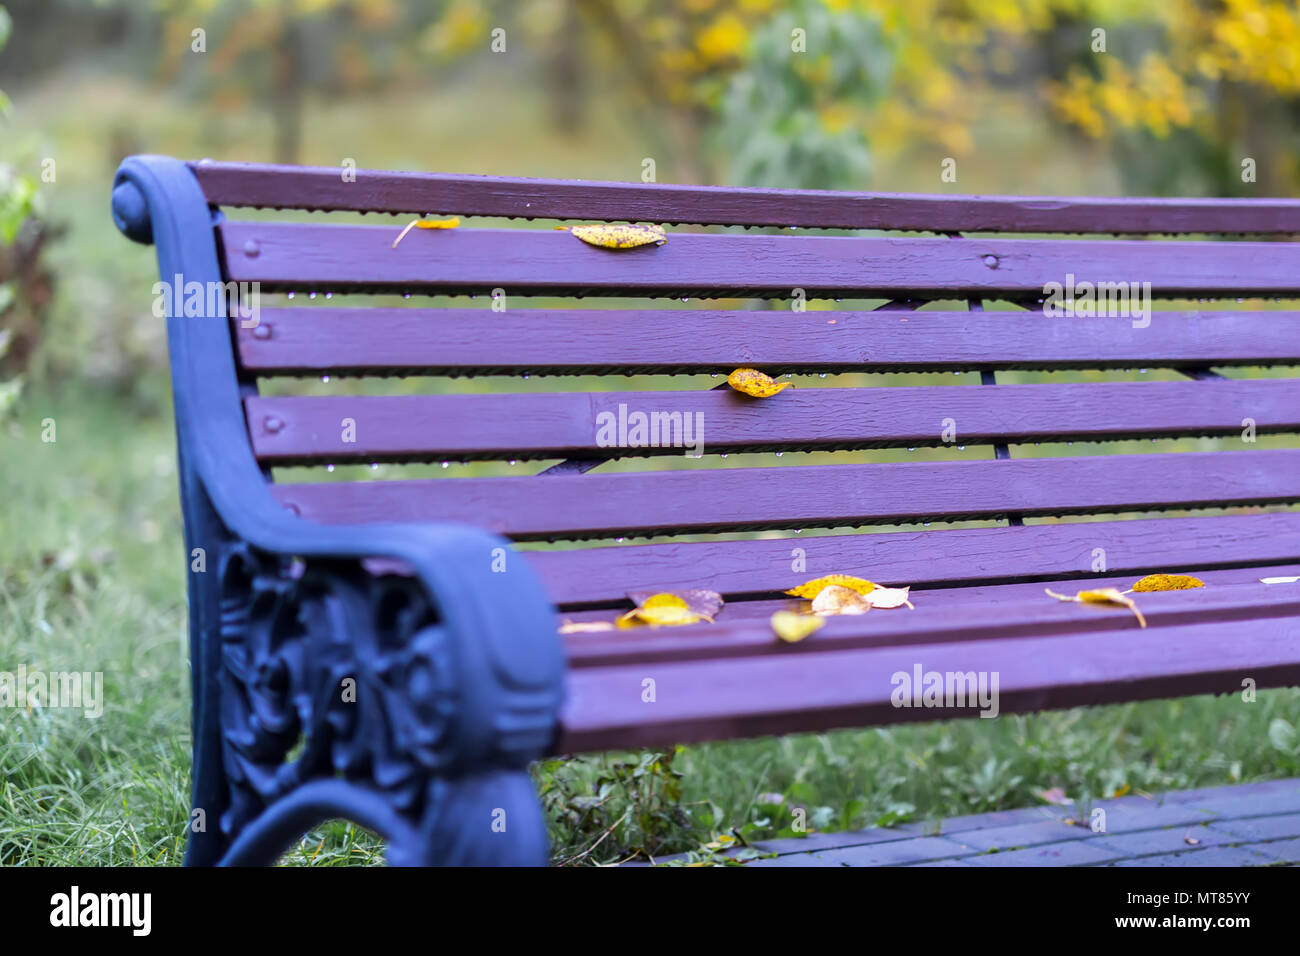 Autumn in park, part of vivid violet benches with yellow leaves close-up. Colorful nostalgic background Stock Photo